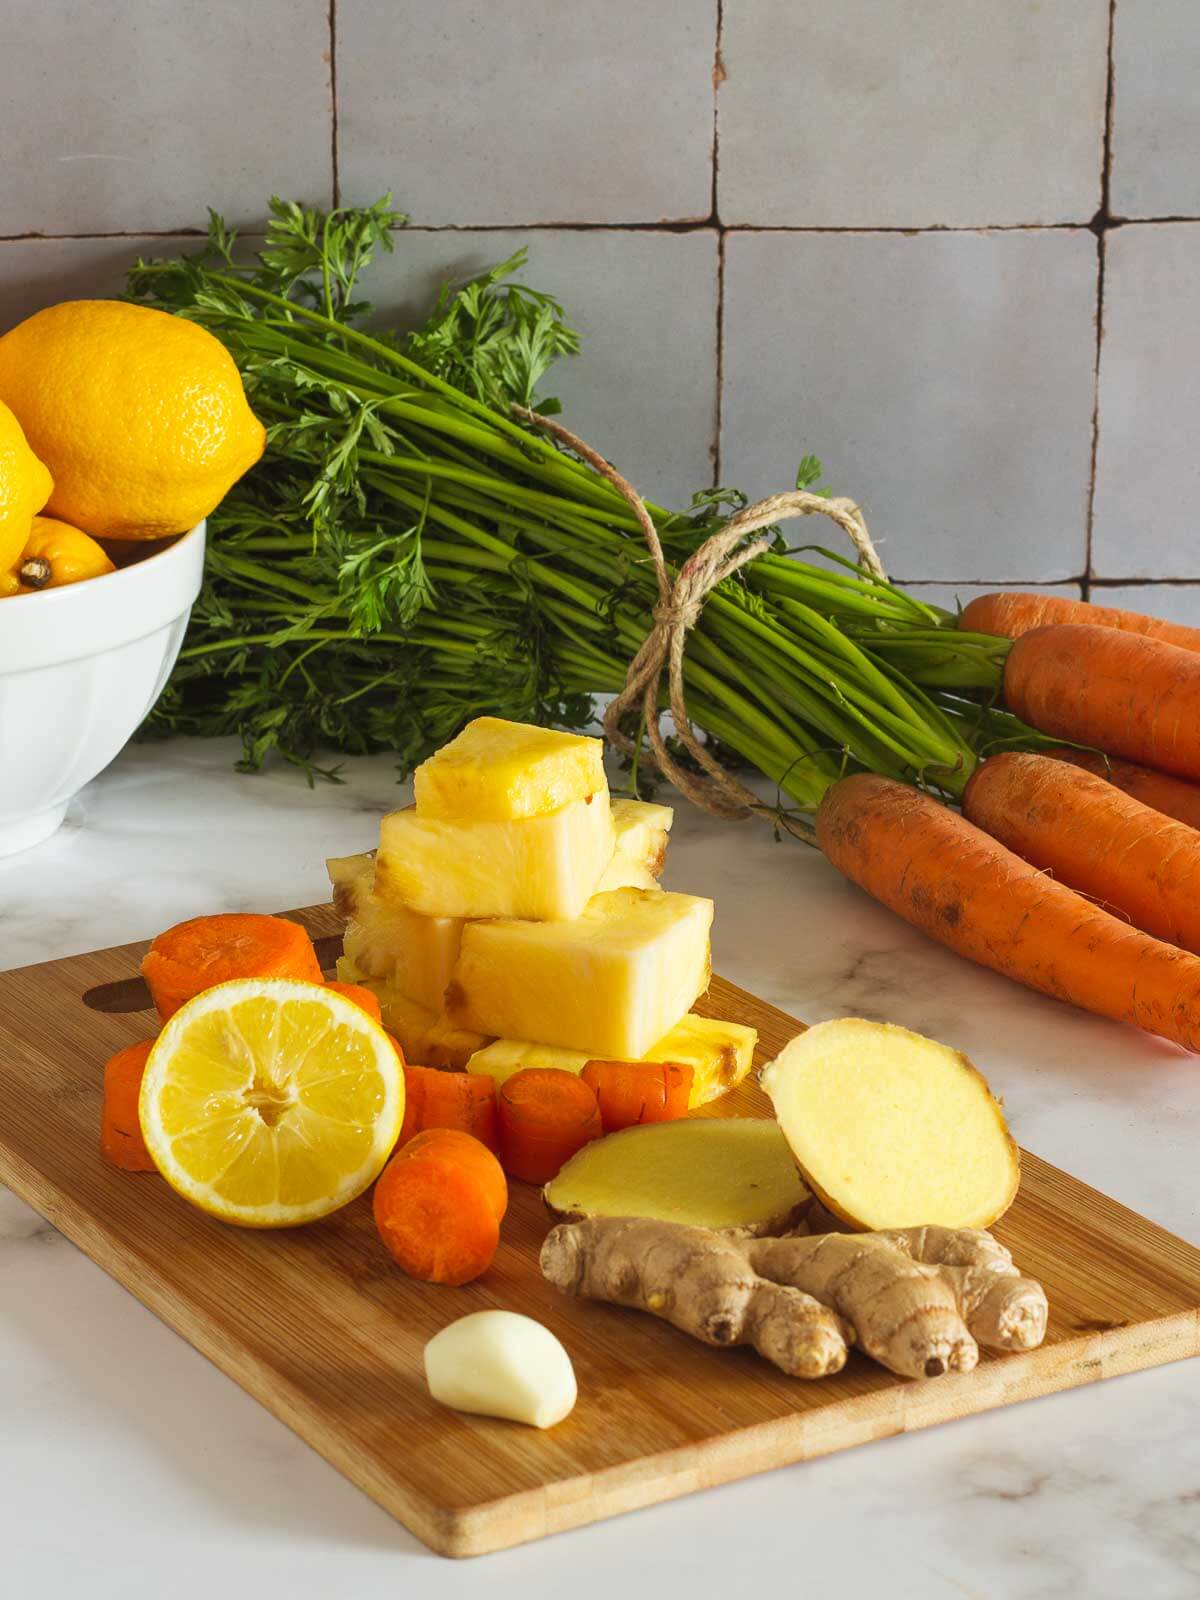 cold and flue juice chopped ingredients